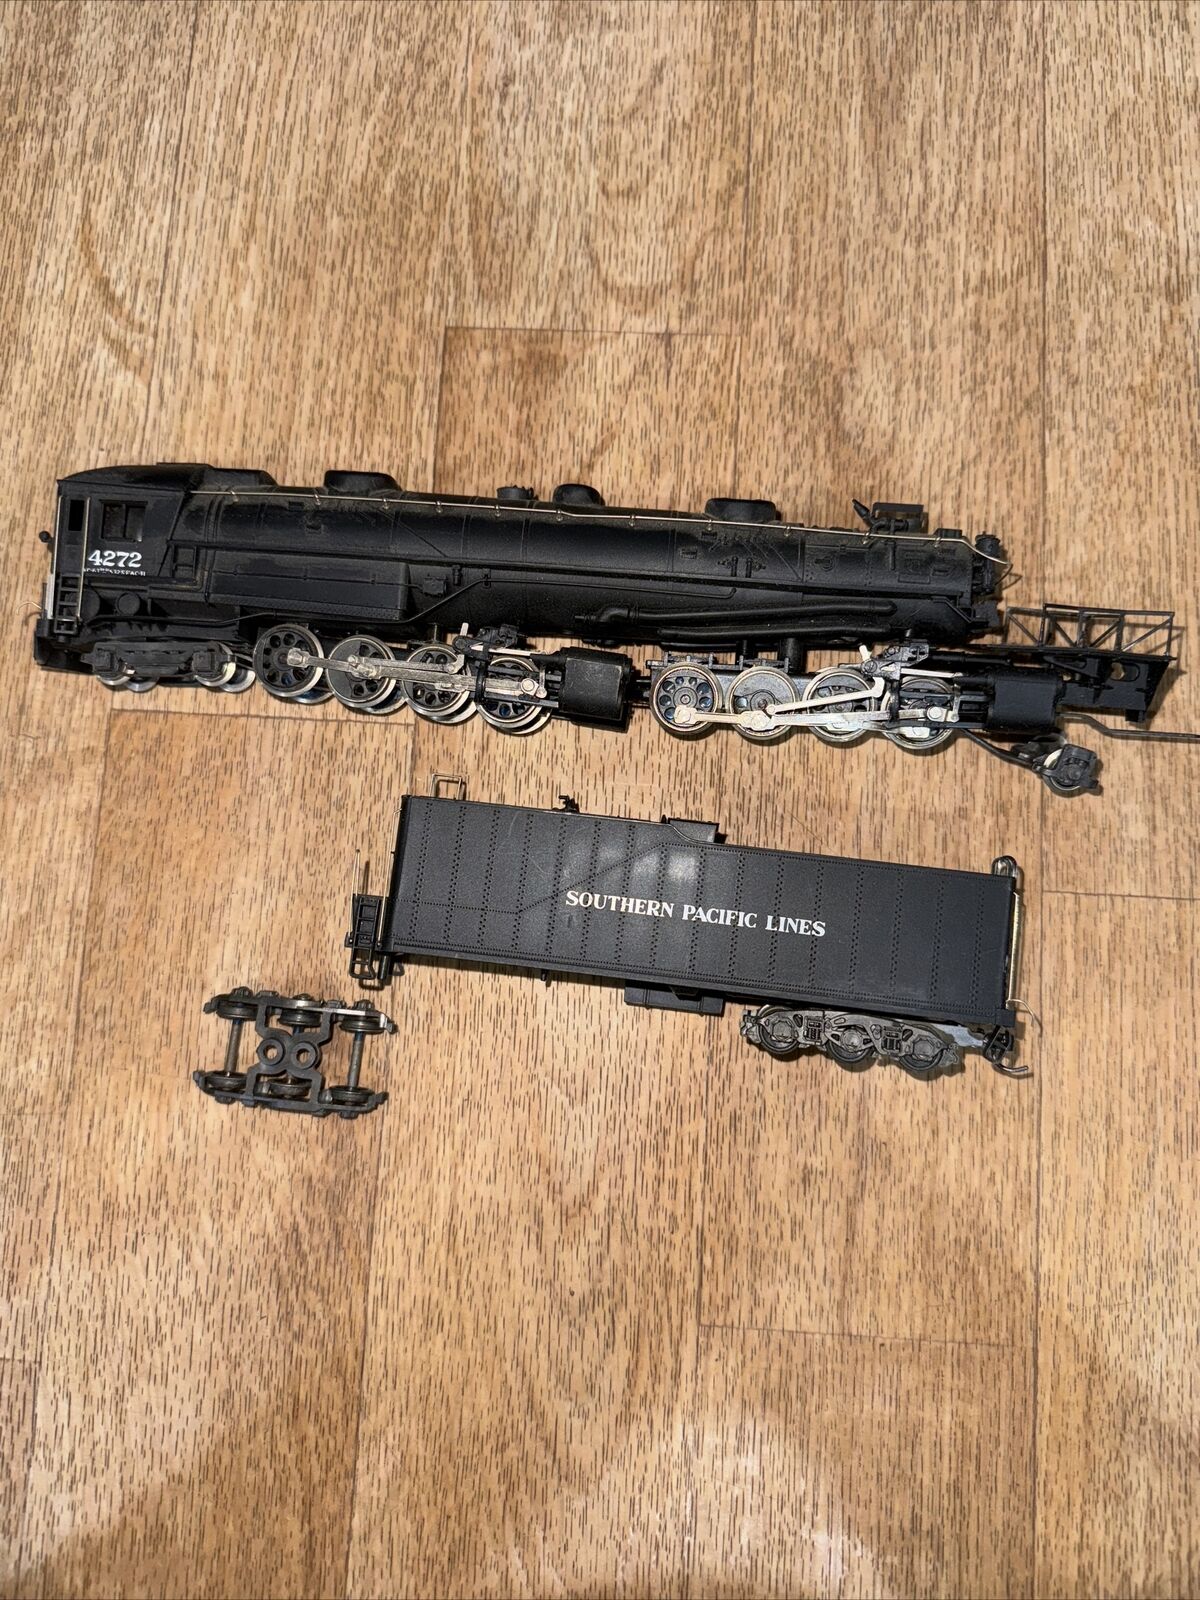 Rivarossi Ho Southern Pacific 4272 Forward Cab Locomotive And Tender